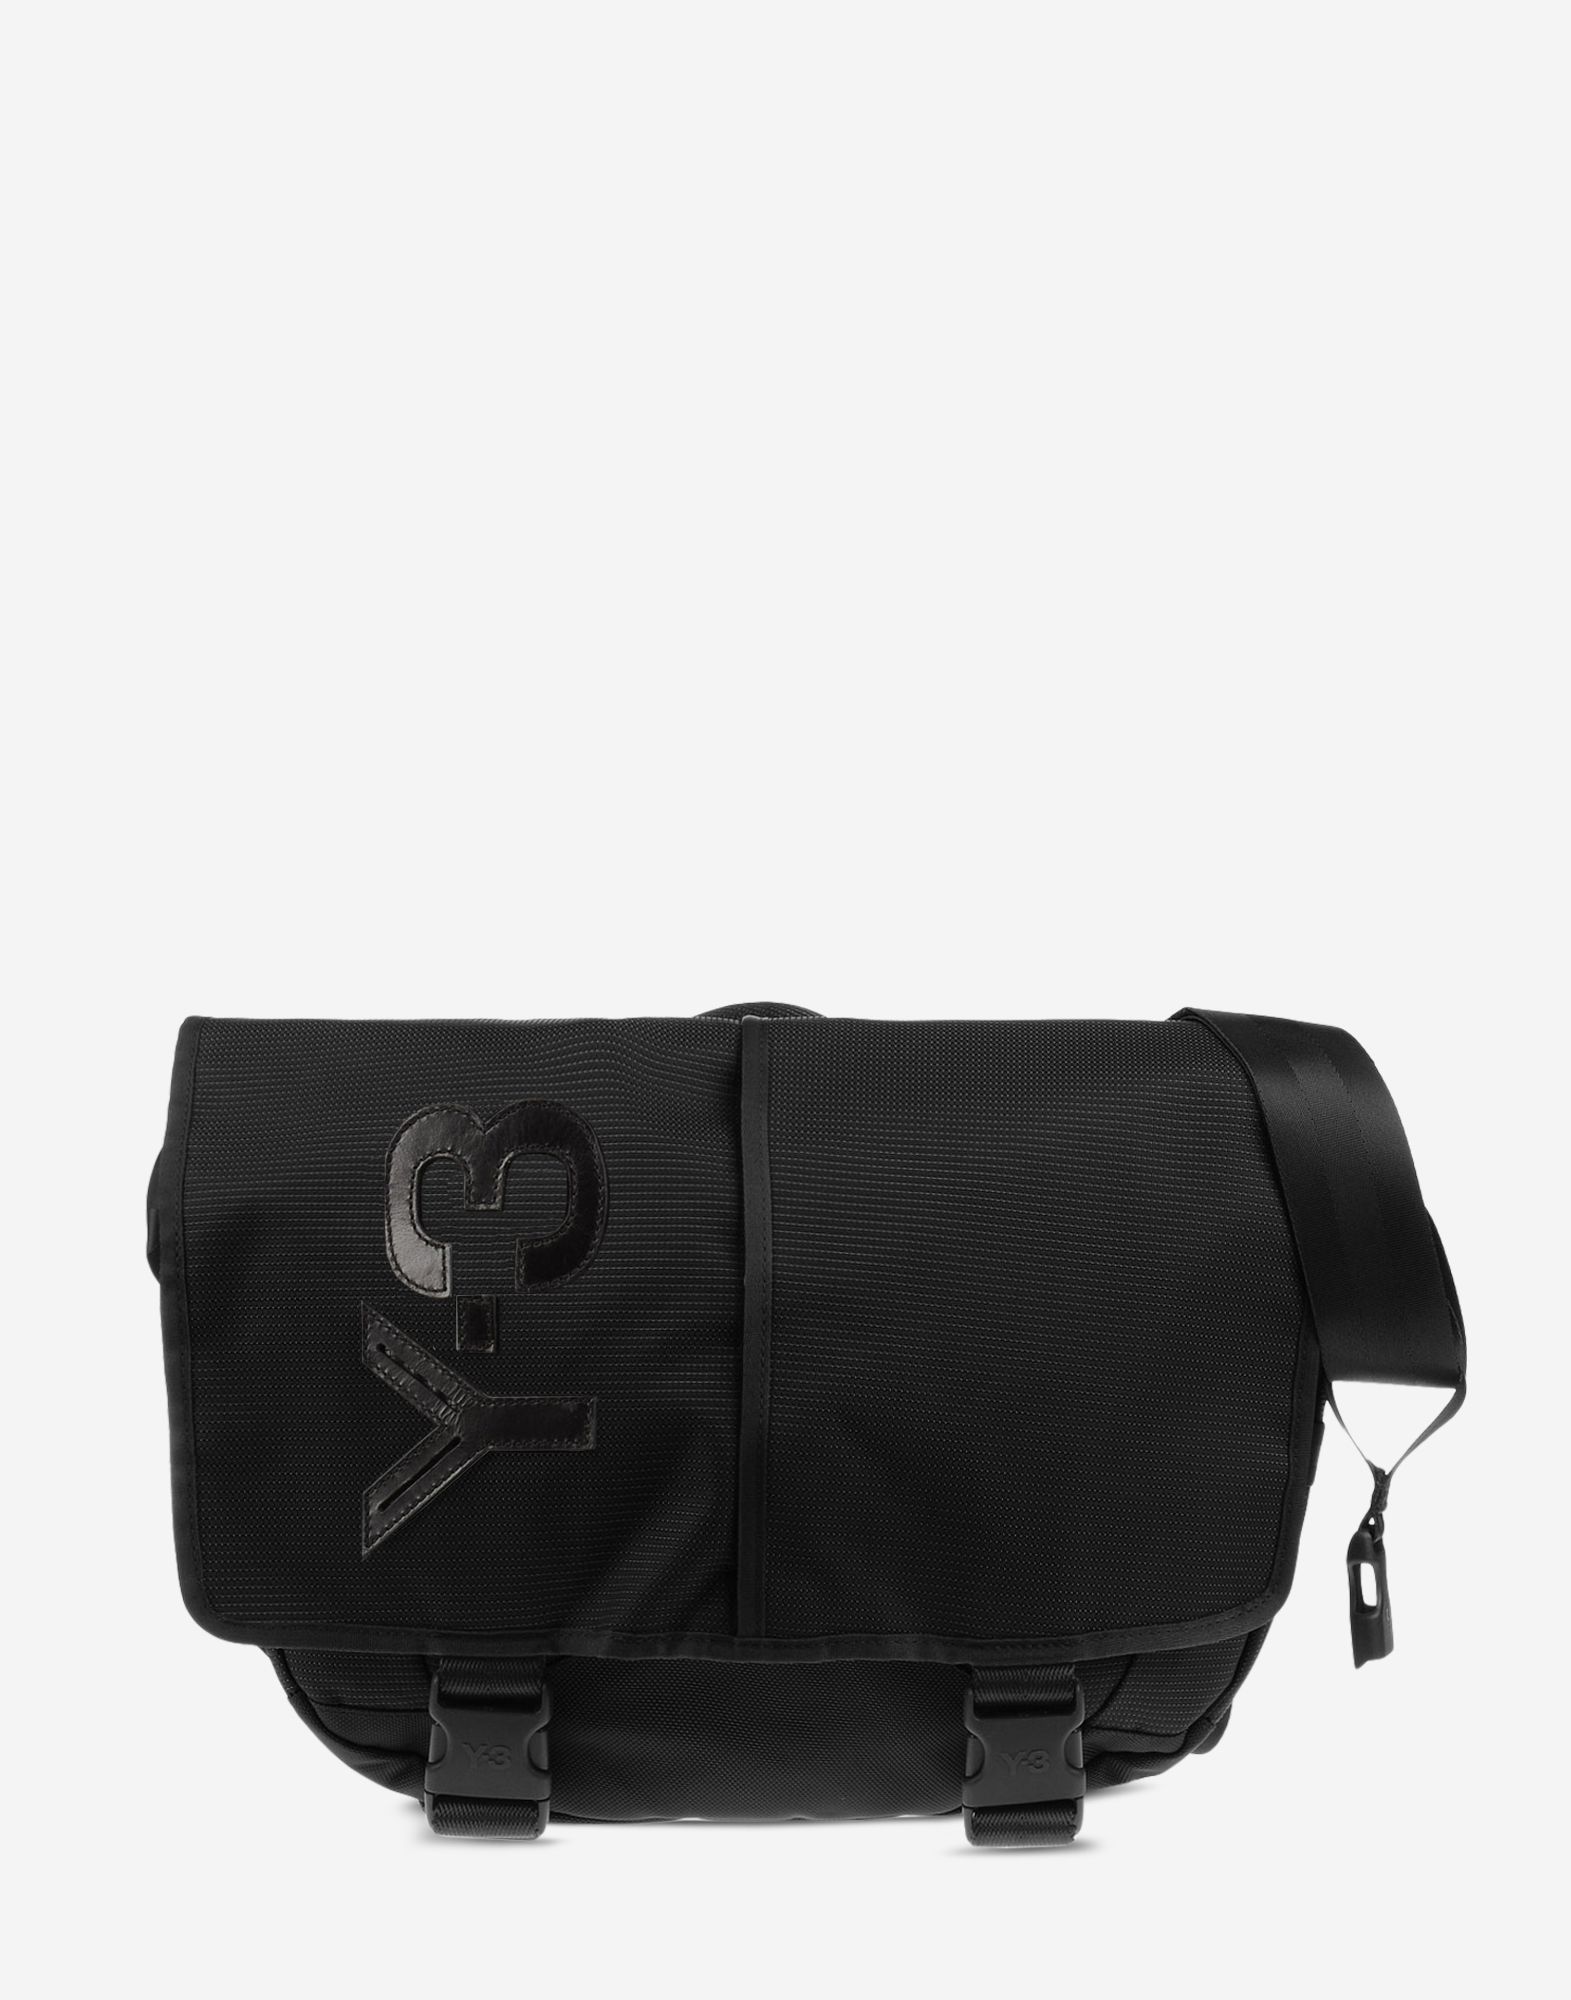 Y 3 Day Messenger Bag for Men | Adidas Y-3 Official Store